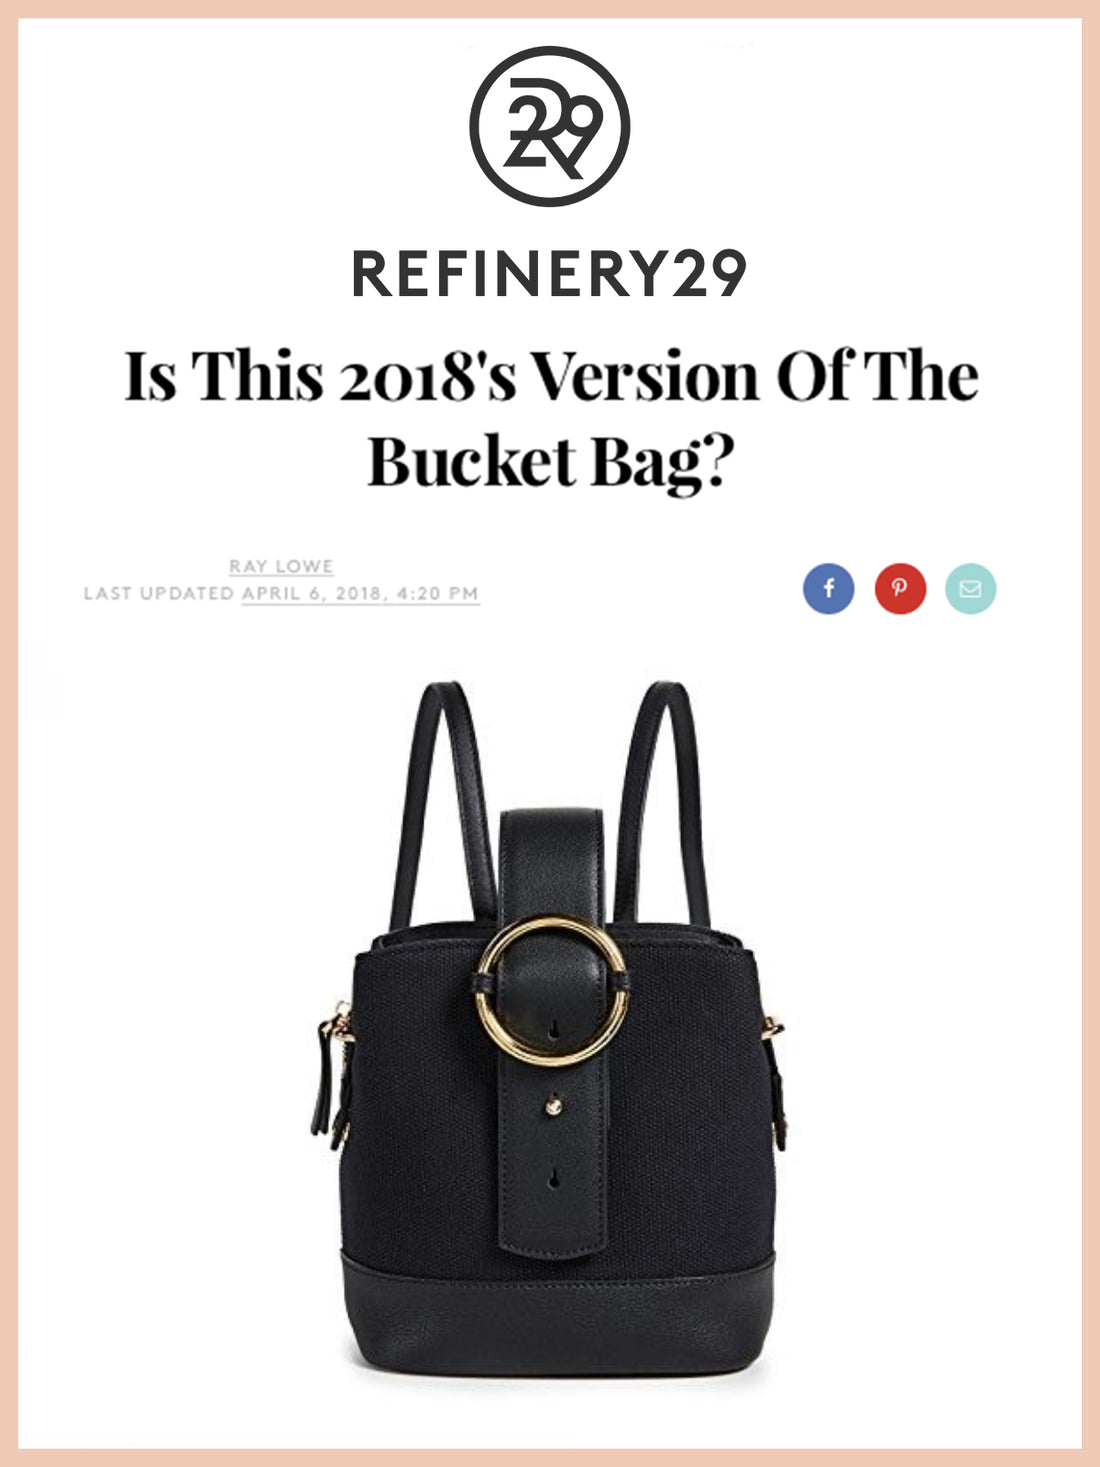 REFINERY29, Is This 2018's Version Of The Bucket Bag?